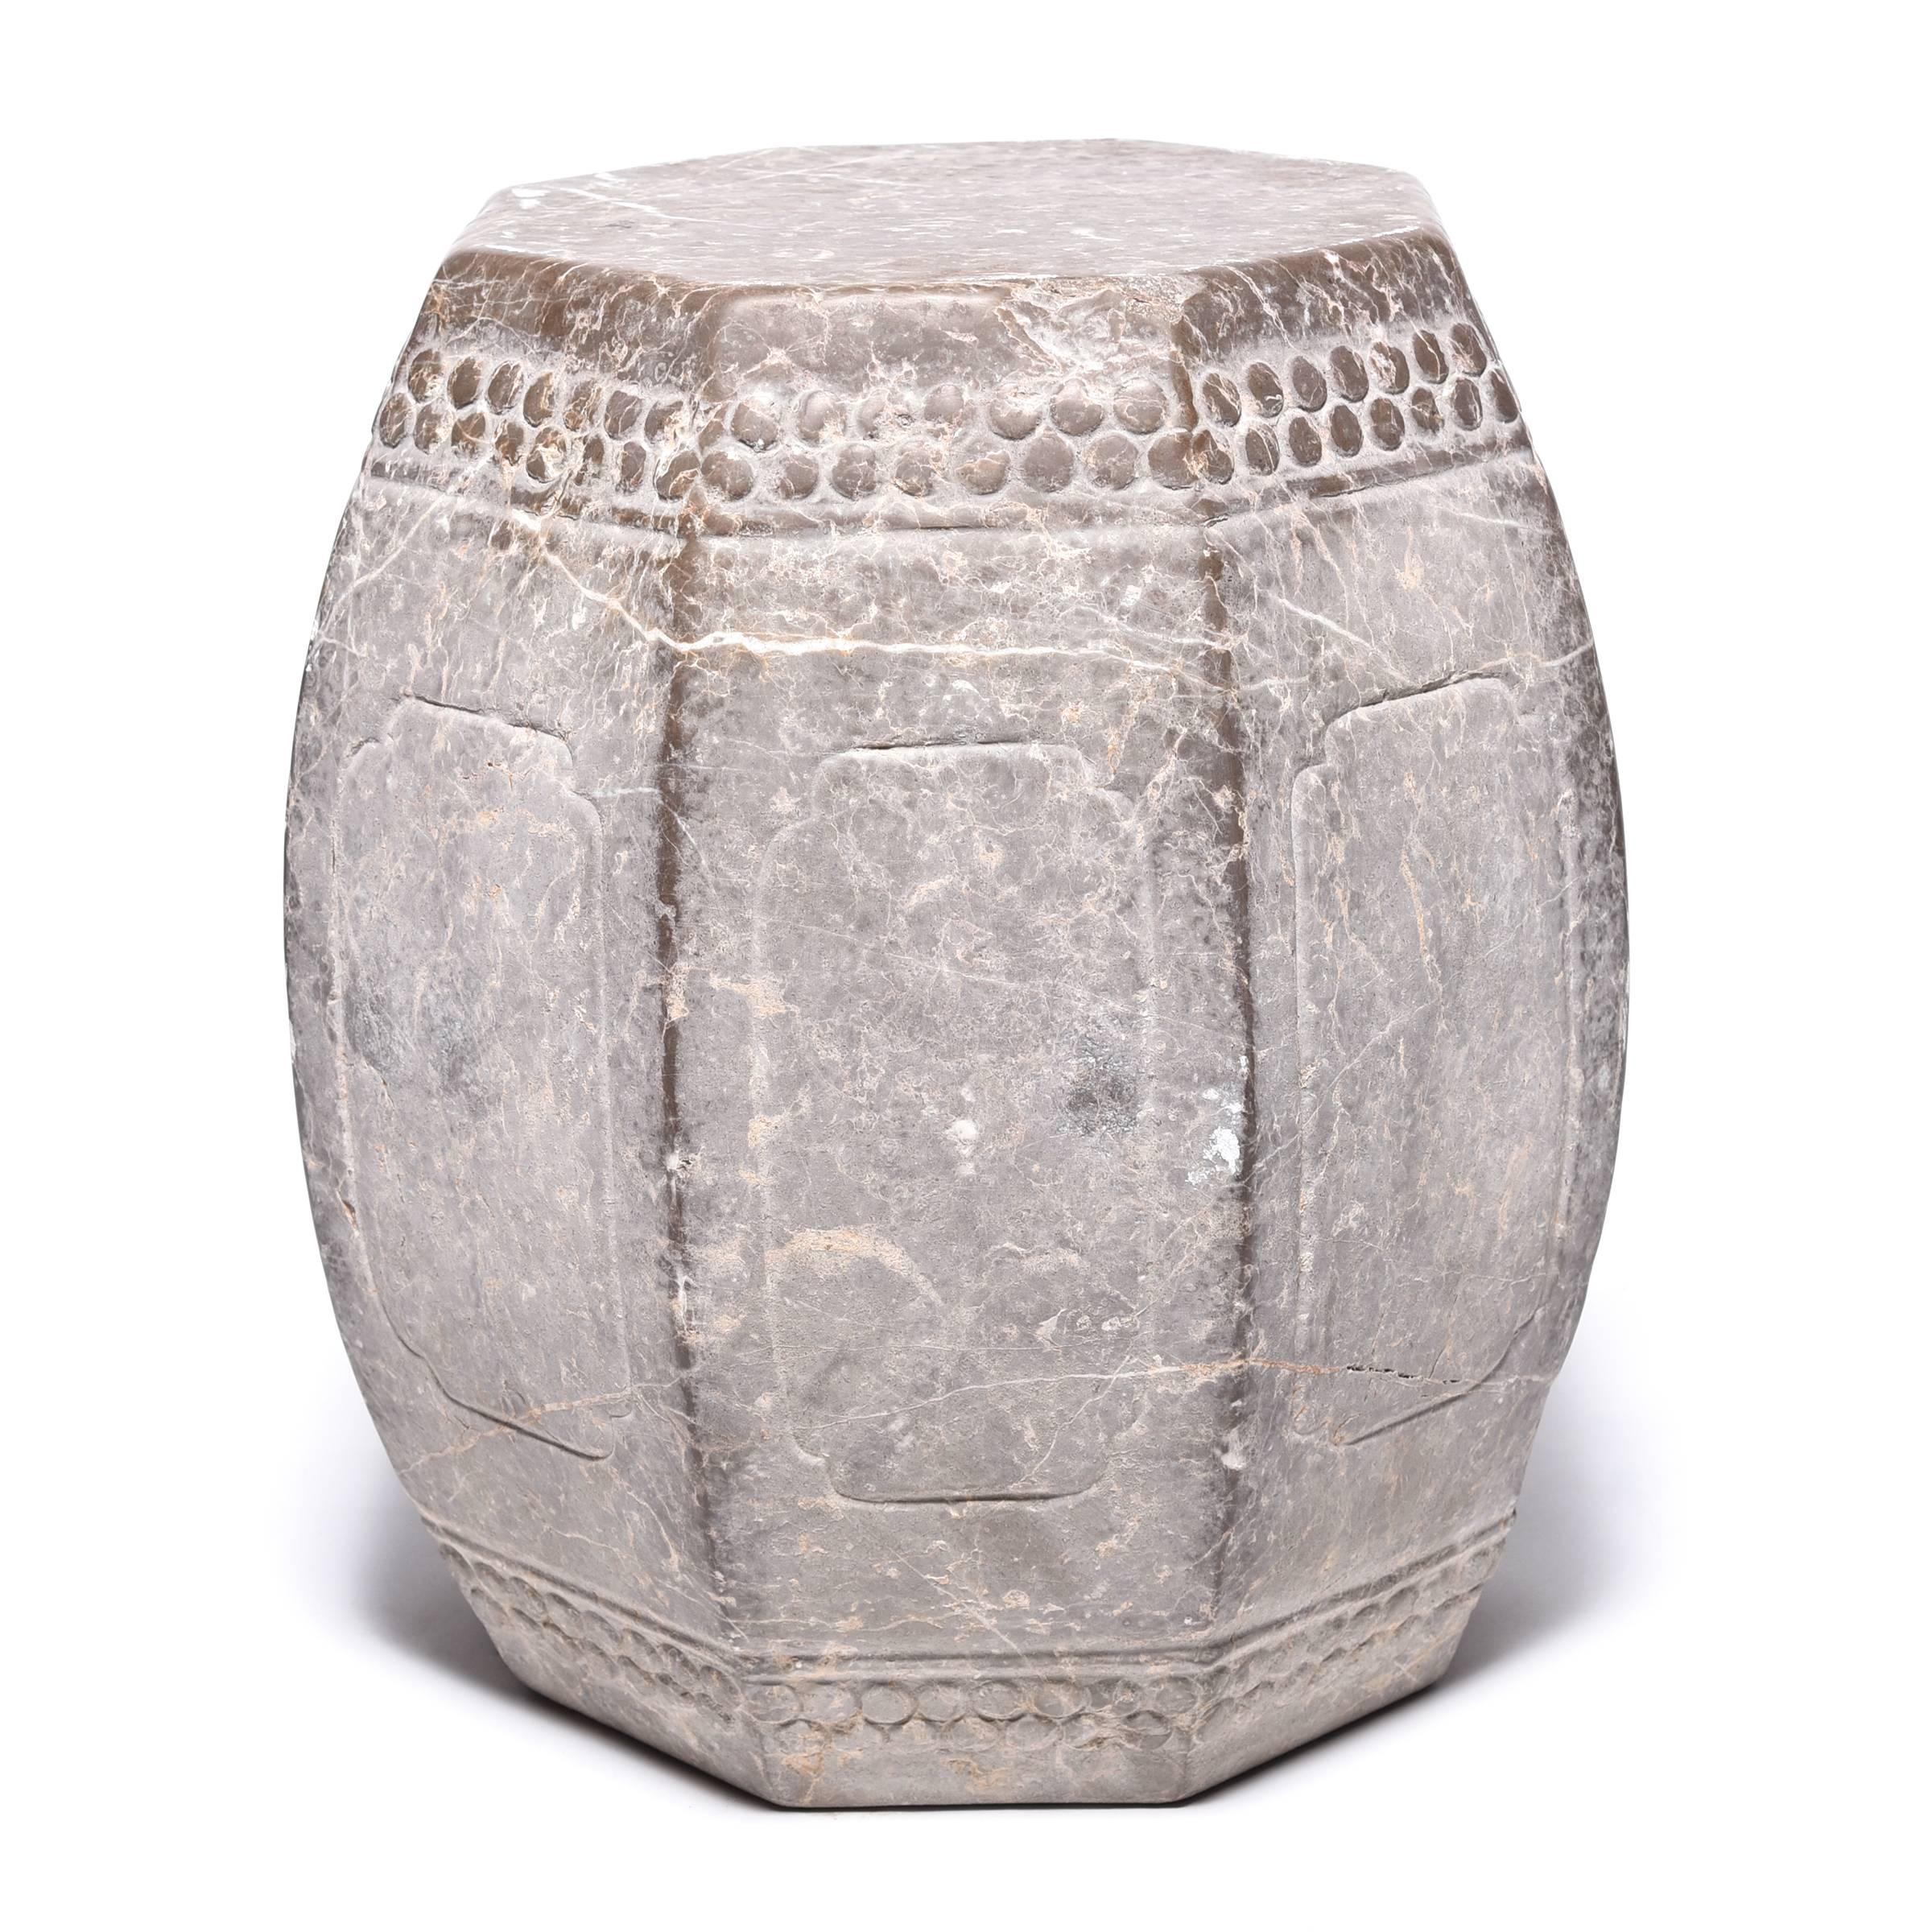 Hand-carved from a block of limestone, this carefully crafted eight-sided stool emulates the look of a drum. A pattern of boss-head nails around the top and bottom imitates those used to stretch a skin on an actual drum. Targeted polishing enhances